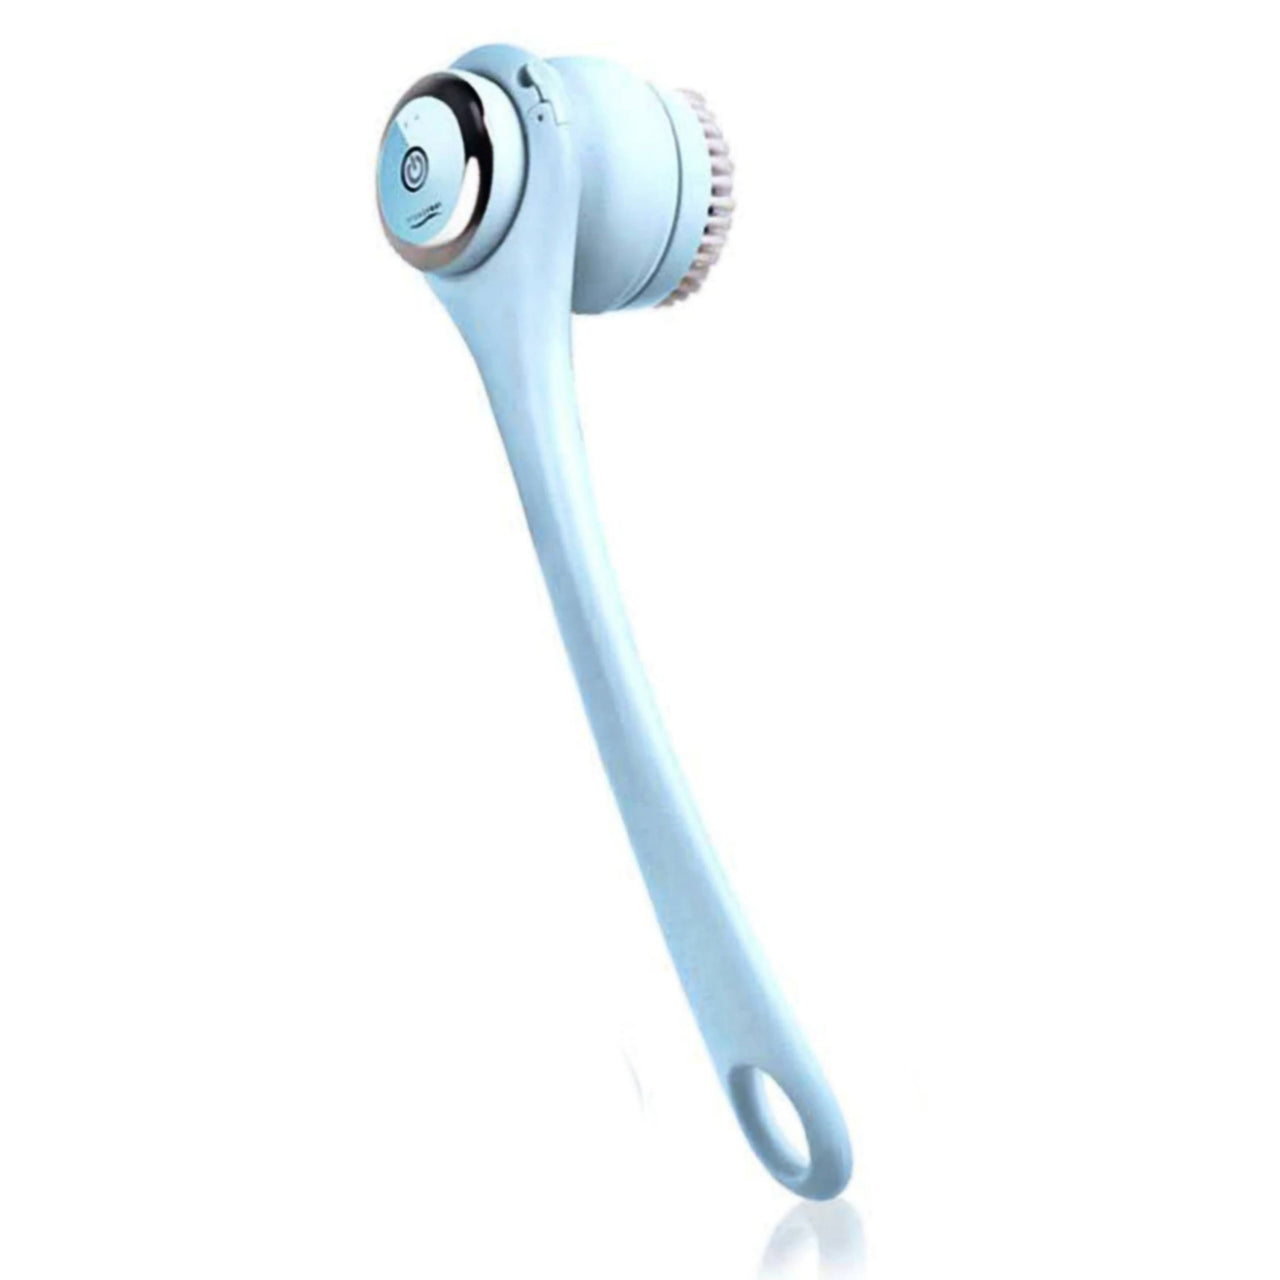 Wireless Waterproof Cleansing and Exfoliating Body Brush Set with 3 Speed 4 Brush Heads Light Blue